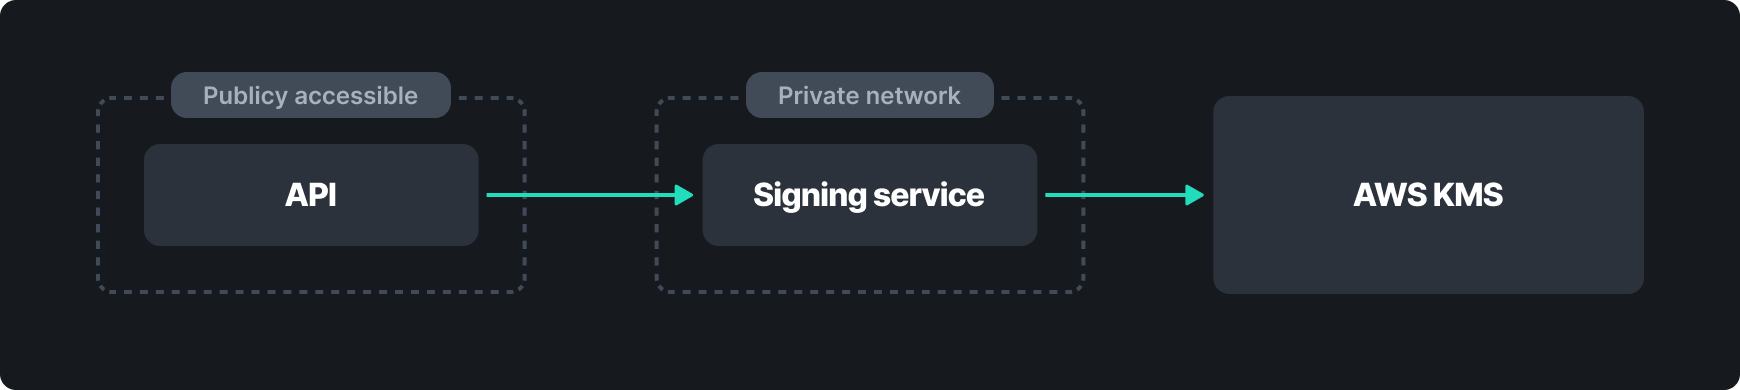 A diagram showing the API in a public VPC, the isolated signing service in a private VPC, and AWS KMS